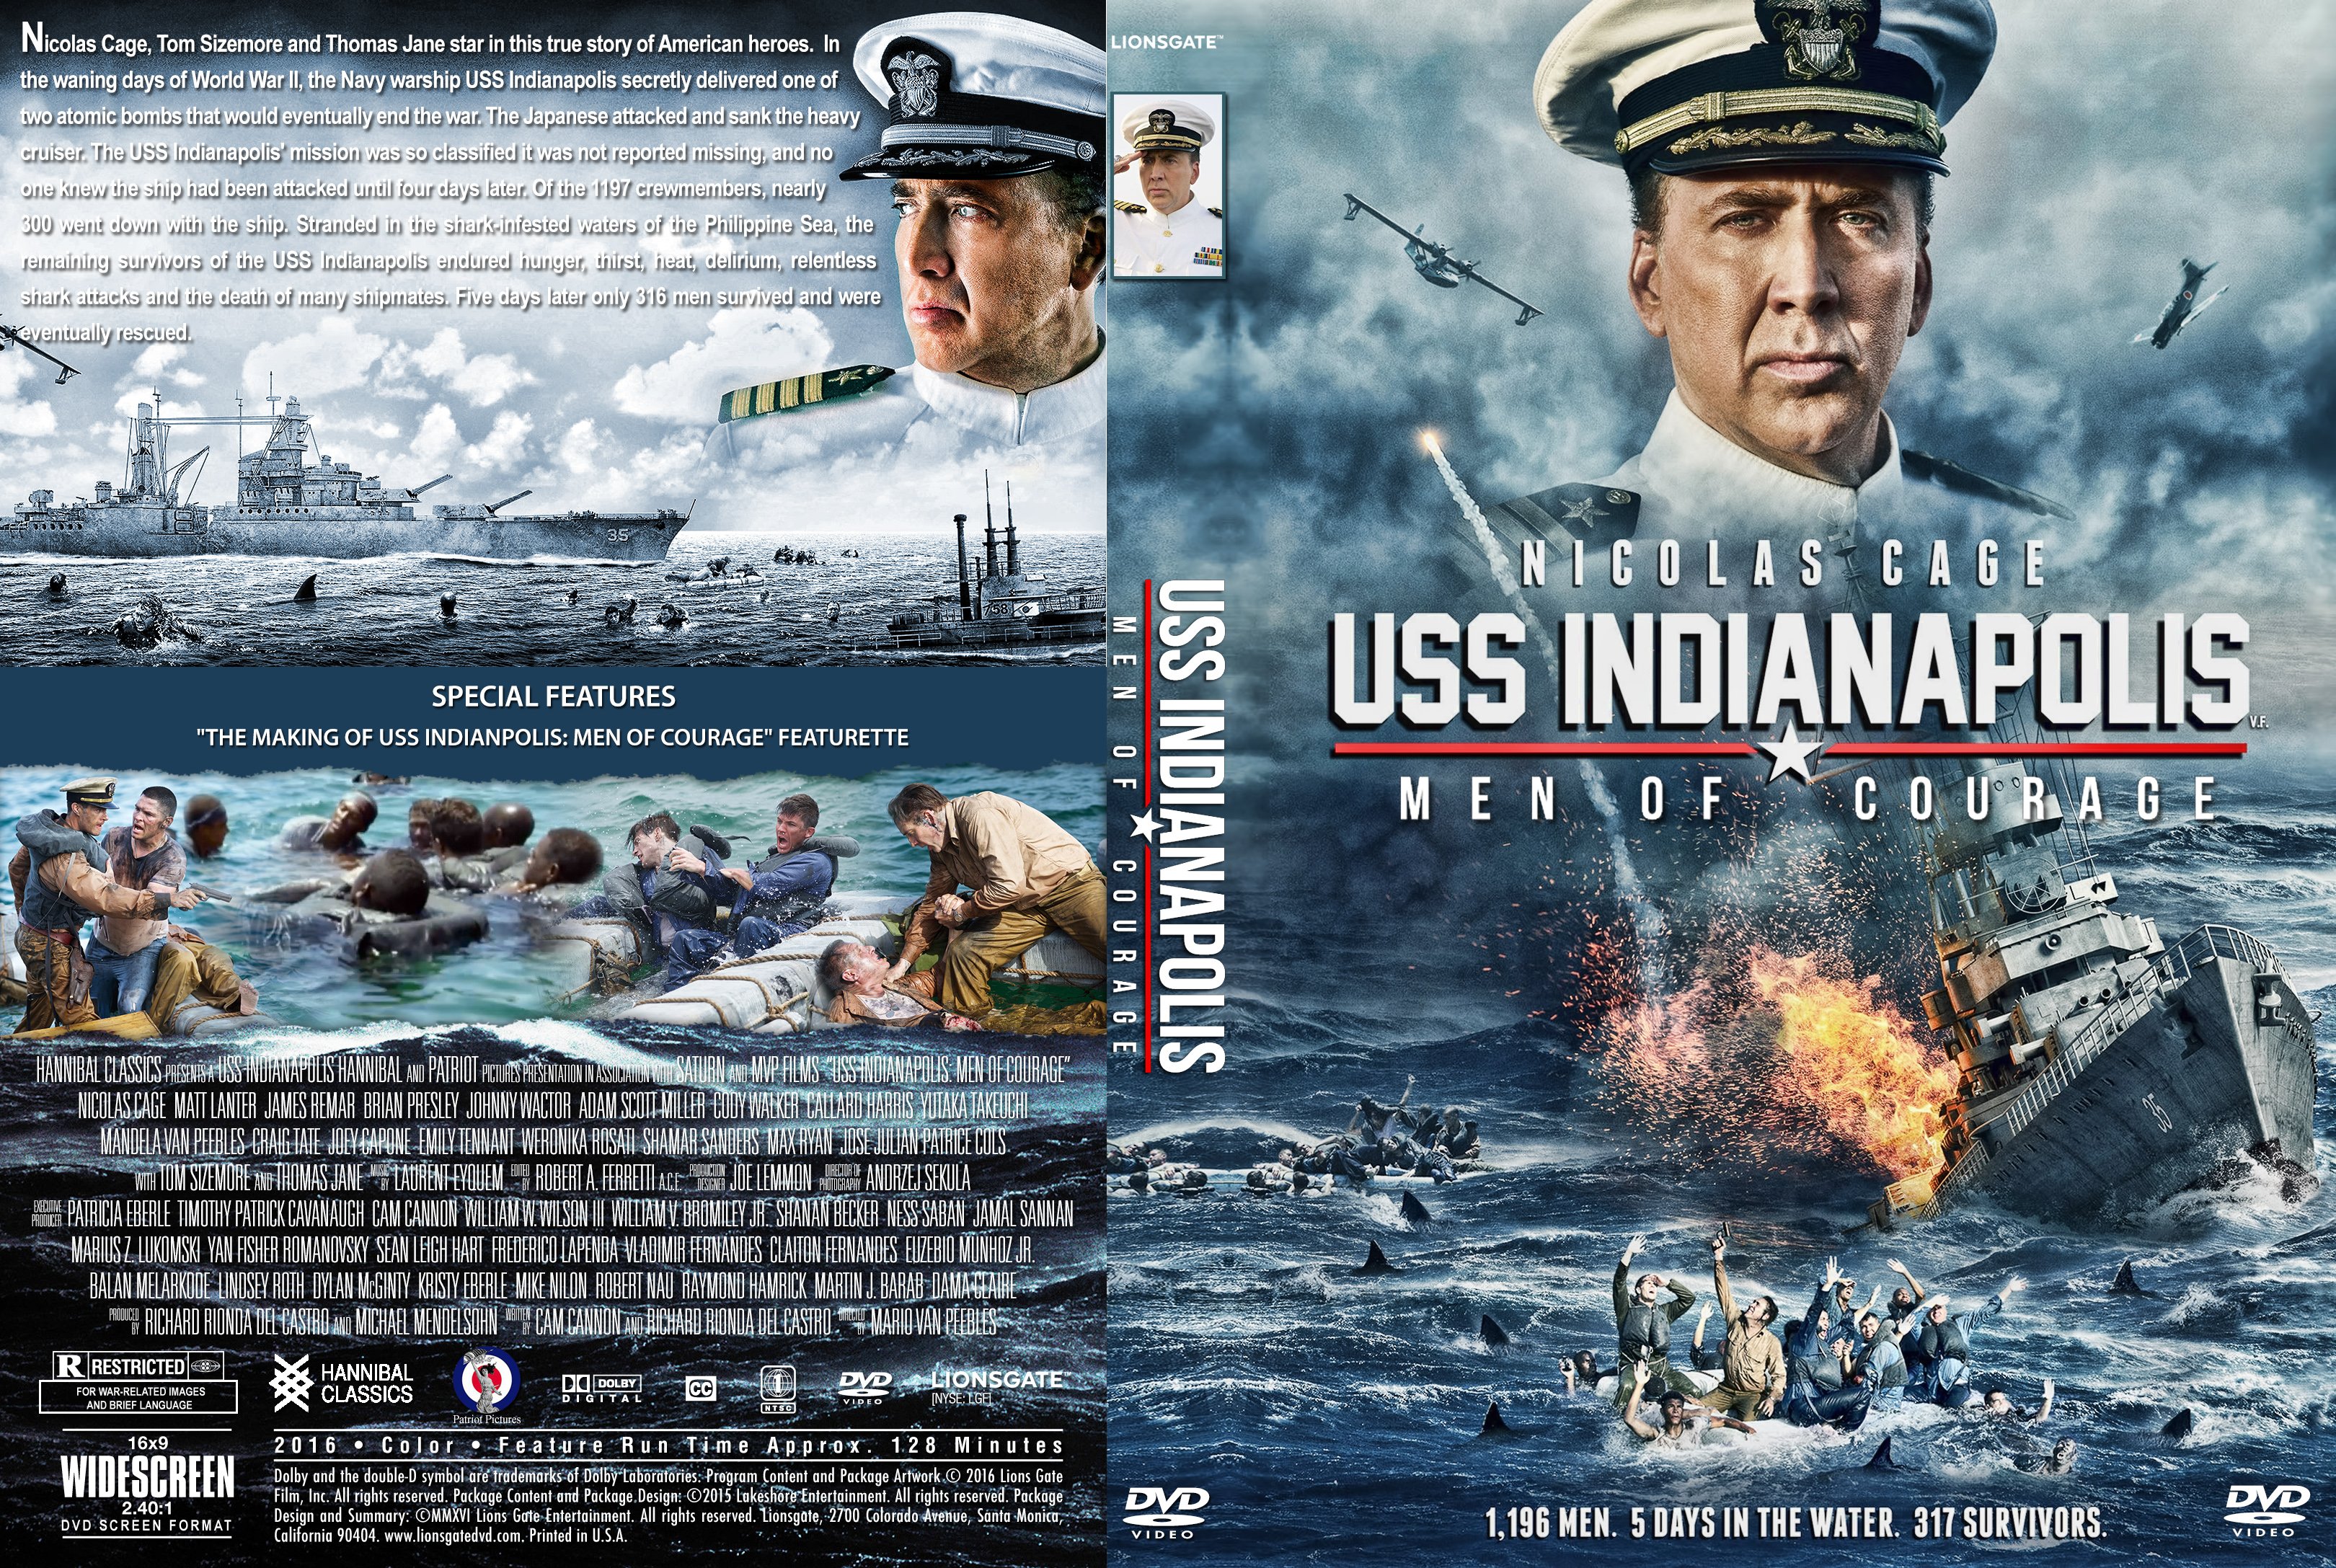 Uss Indianapolis Men Of Courage 2017 Front Dvd Covers Cover Century Over 500 000 Album Art Covers For Free [ 2175 x 3240 Pixel ]